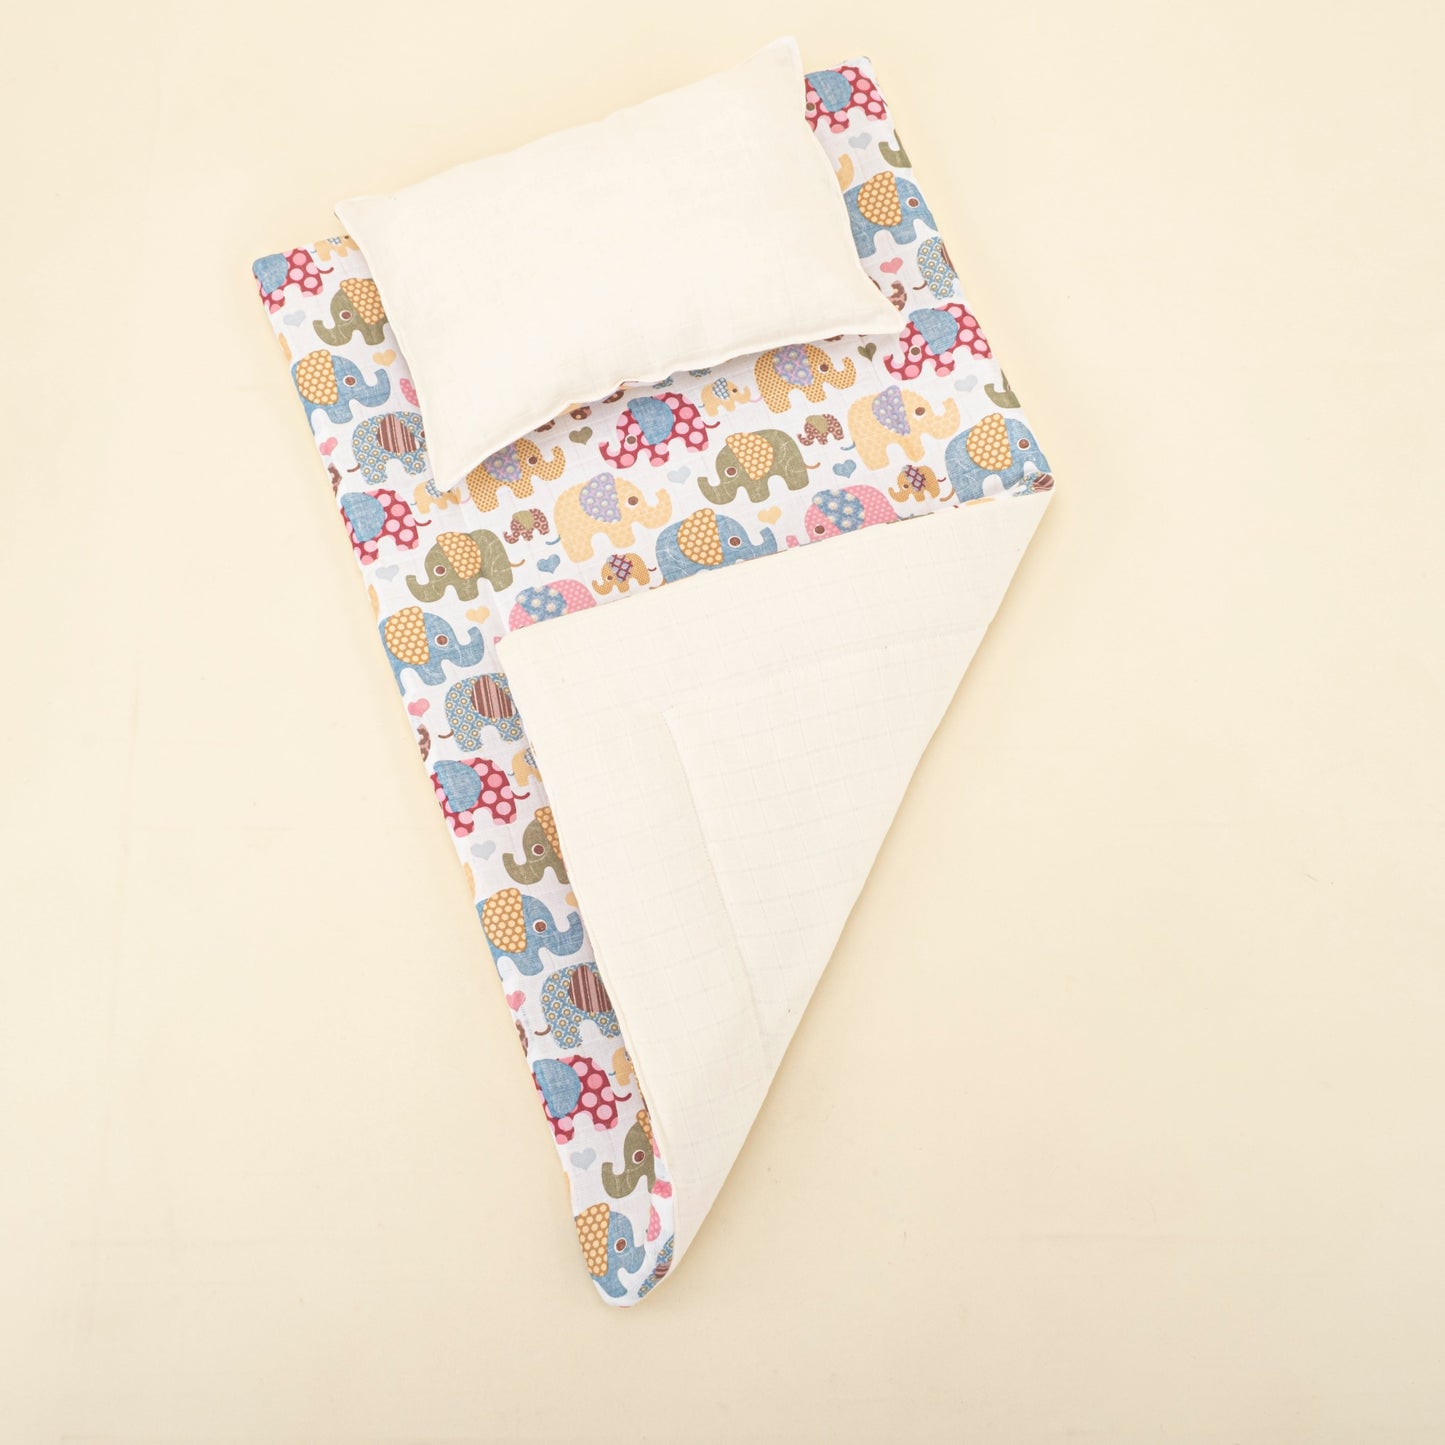 Double Side Changing Pad - Cream Muslin - Colorful Elephants